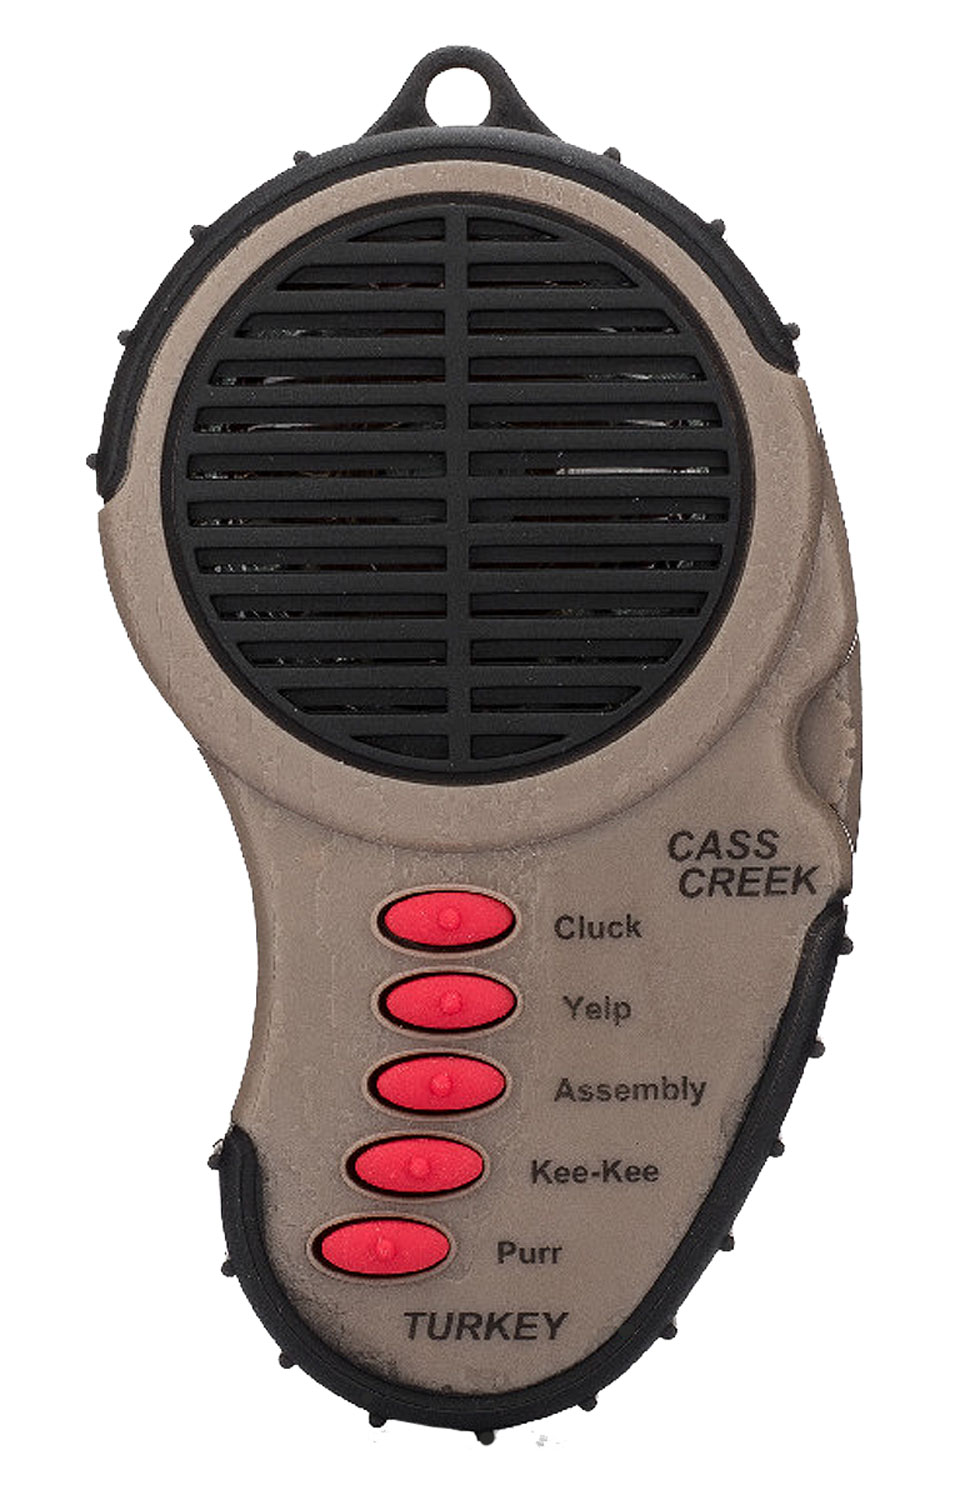 Cass Creek 969 Ergo Electronic  Call Attracts Turkeys, Brown Plastic Includes Belt Clip